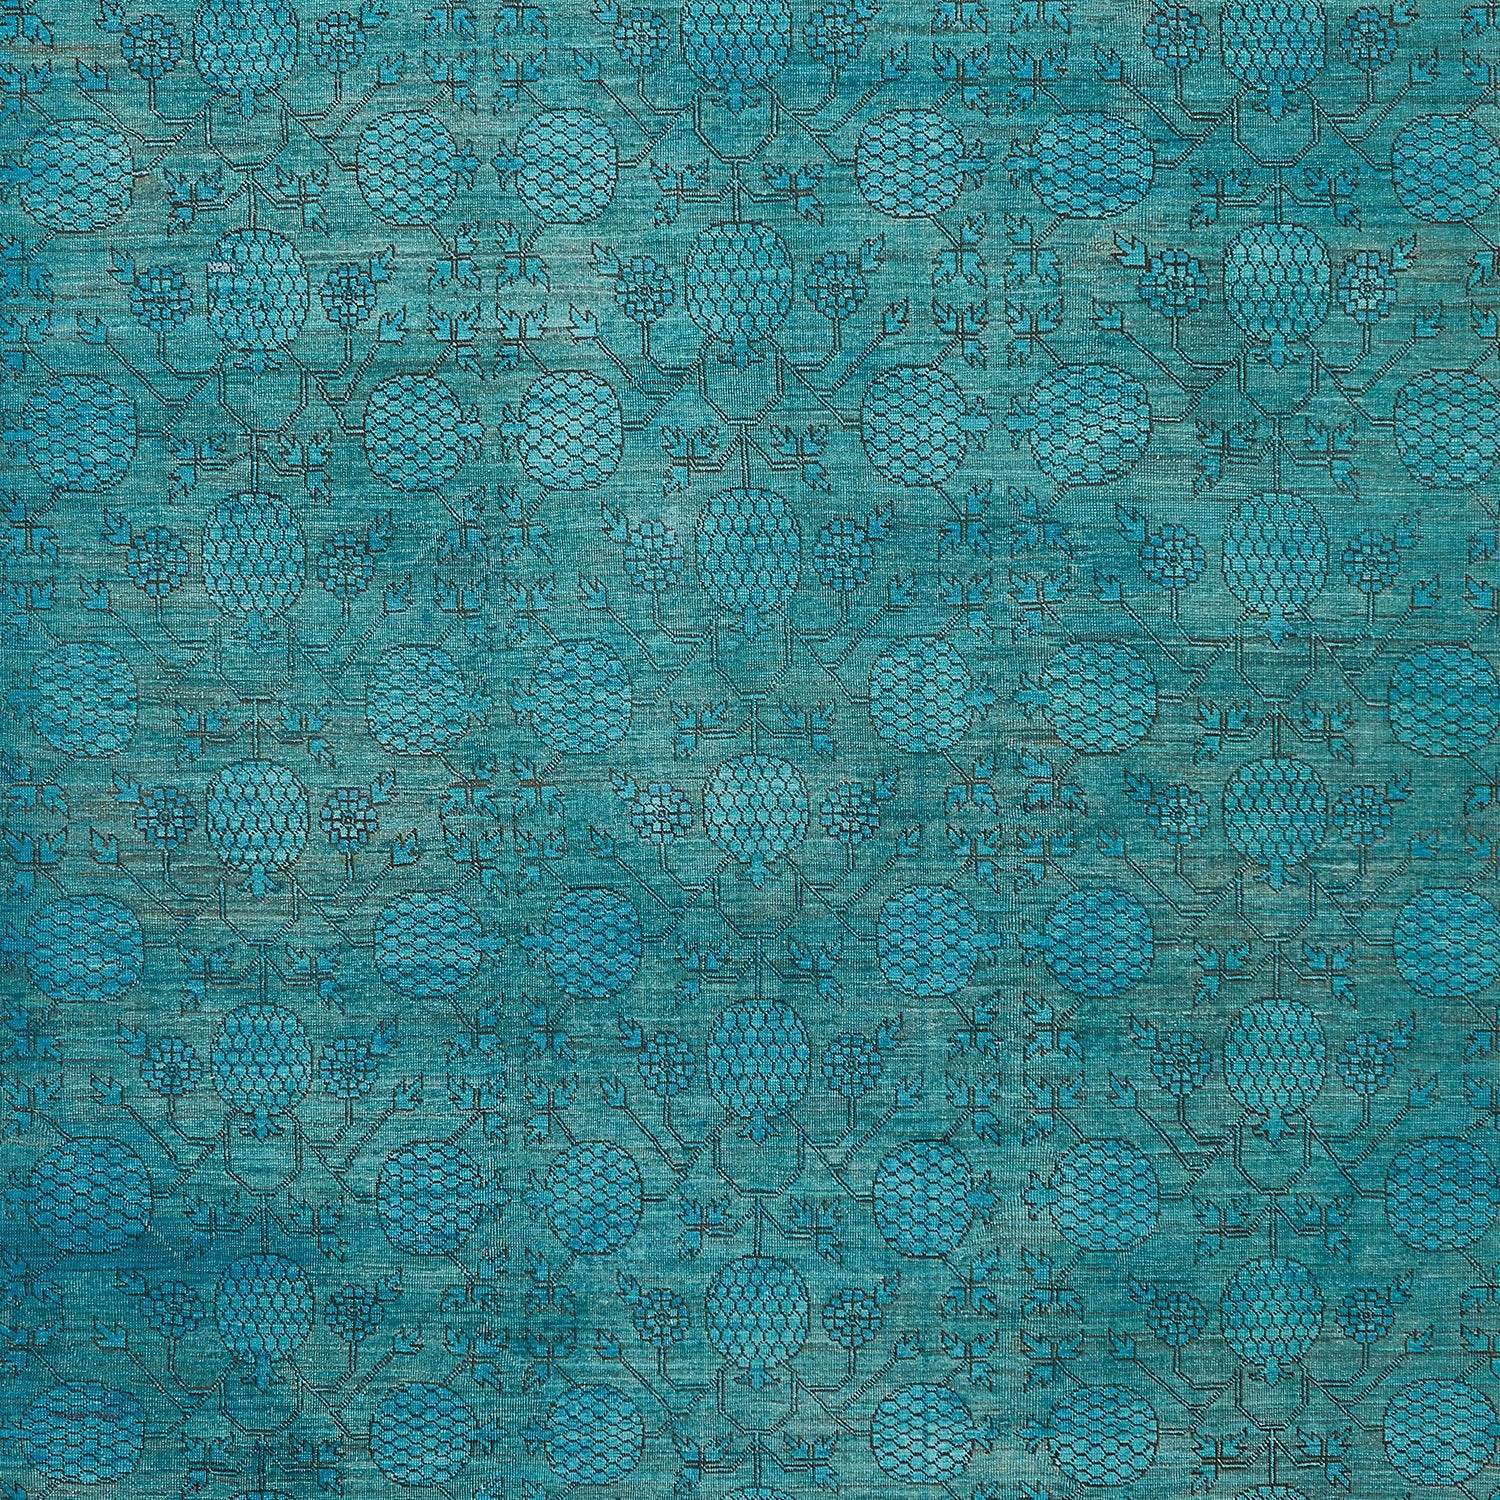 Green Overdyed Wool Rug - 6'7" x 11'1"